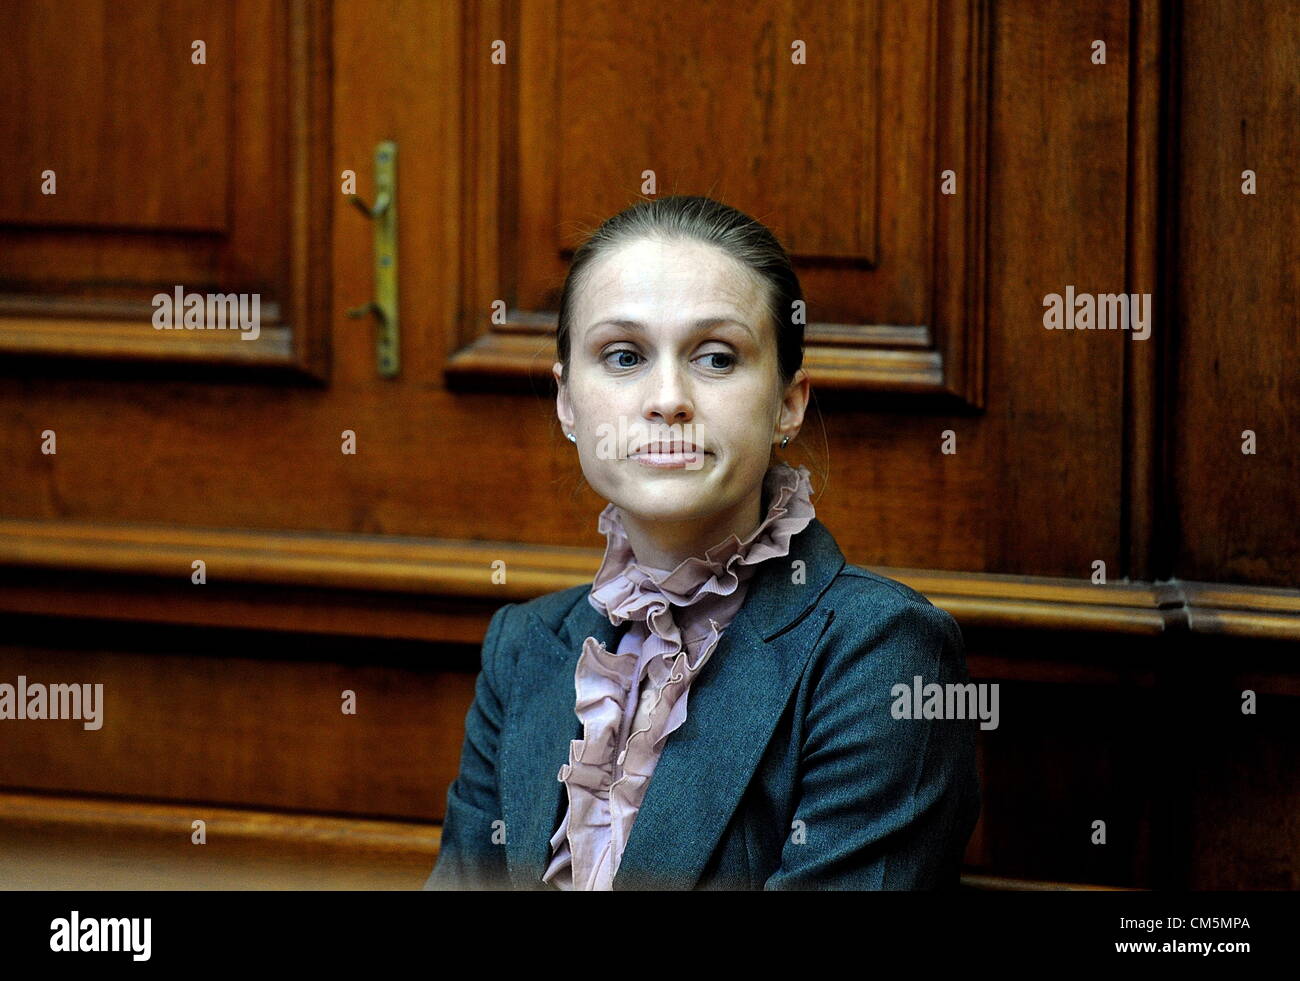 CAPE TOWN, SOUTH AFRICA: Pathologist Dr Janette Verster testifies in the Cape High Court on October 10, 2012 during the trial of Xolile Mngeni who is accused of murdering British tourist Anni Dewani in Cape Town, South Africa.  Mngeni stands accused of shooting Anni, in a murder allegedly plotted by her British husband Shrien Dewani. (Photo by Gallo Images / Foto24 / Lulama Zenzile) Stock Photo